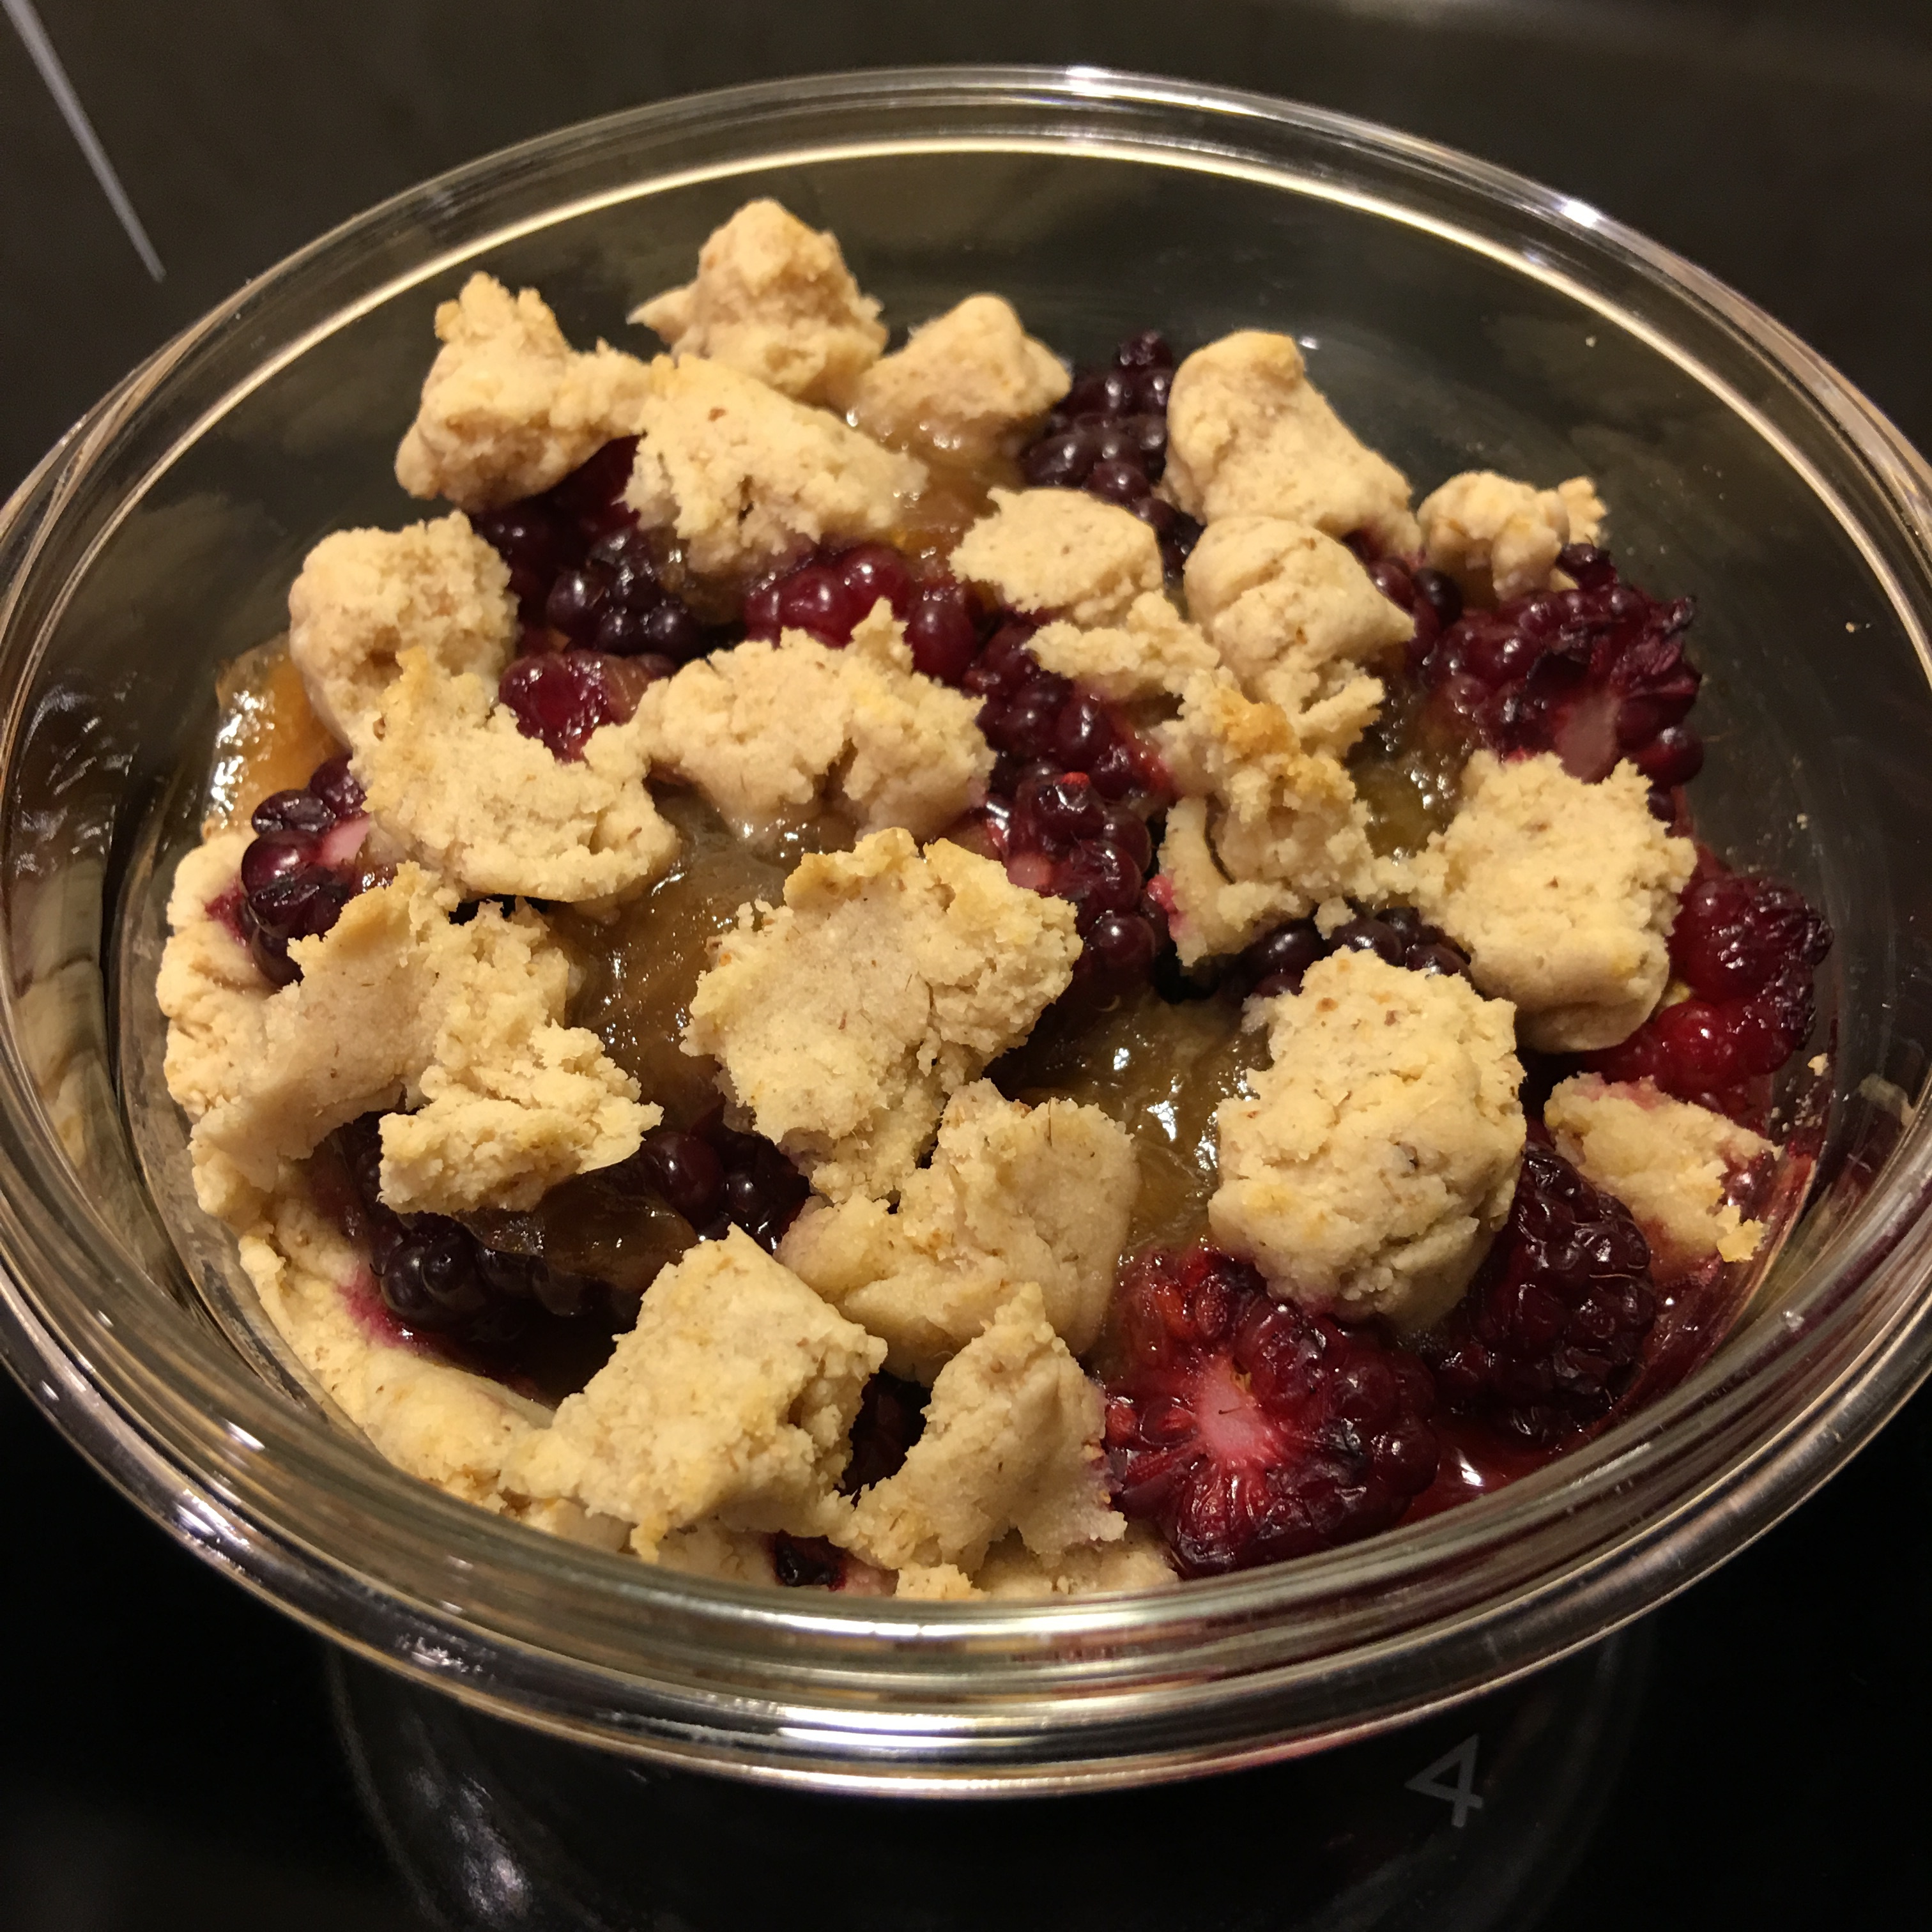 Peach and Blackberry Pie by The Allergy Chef